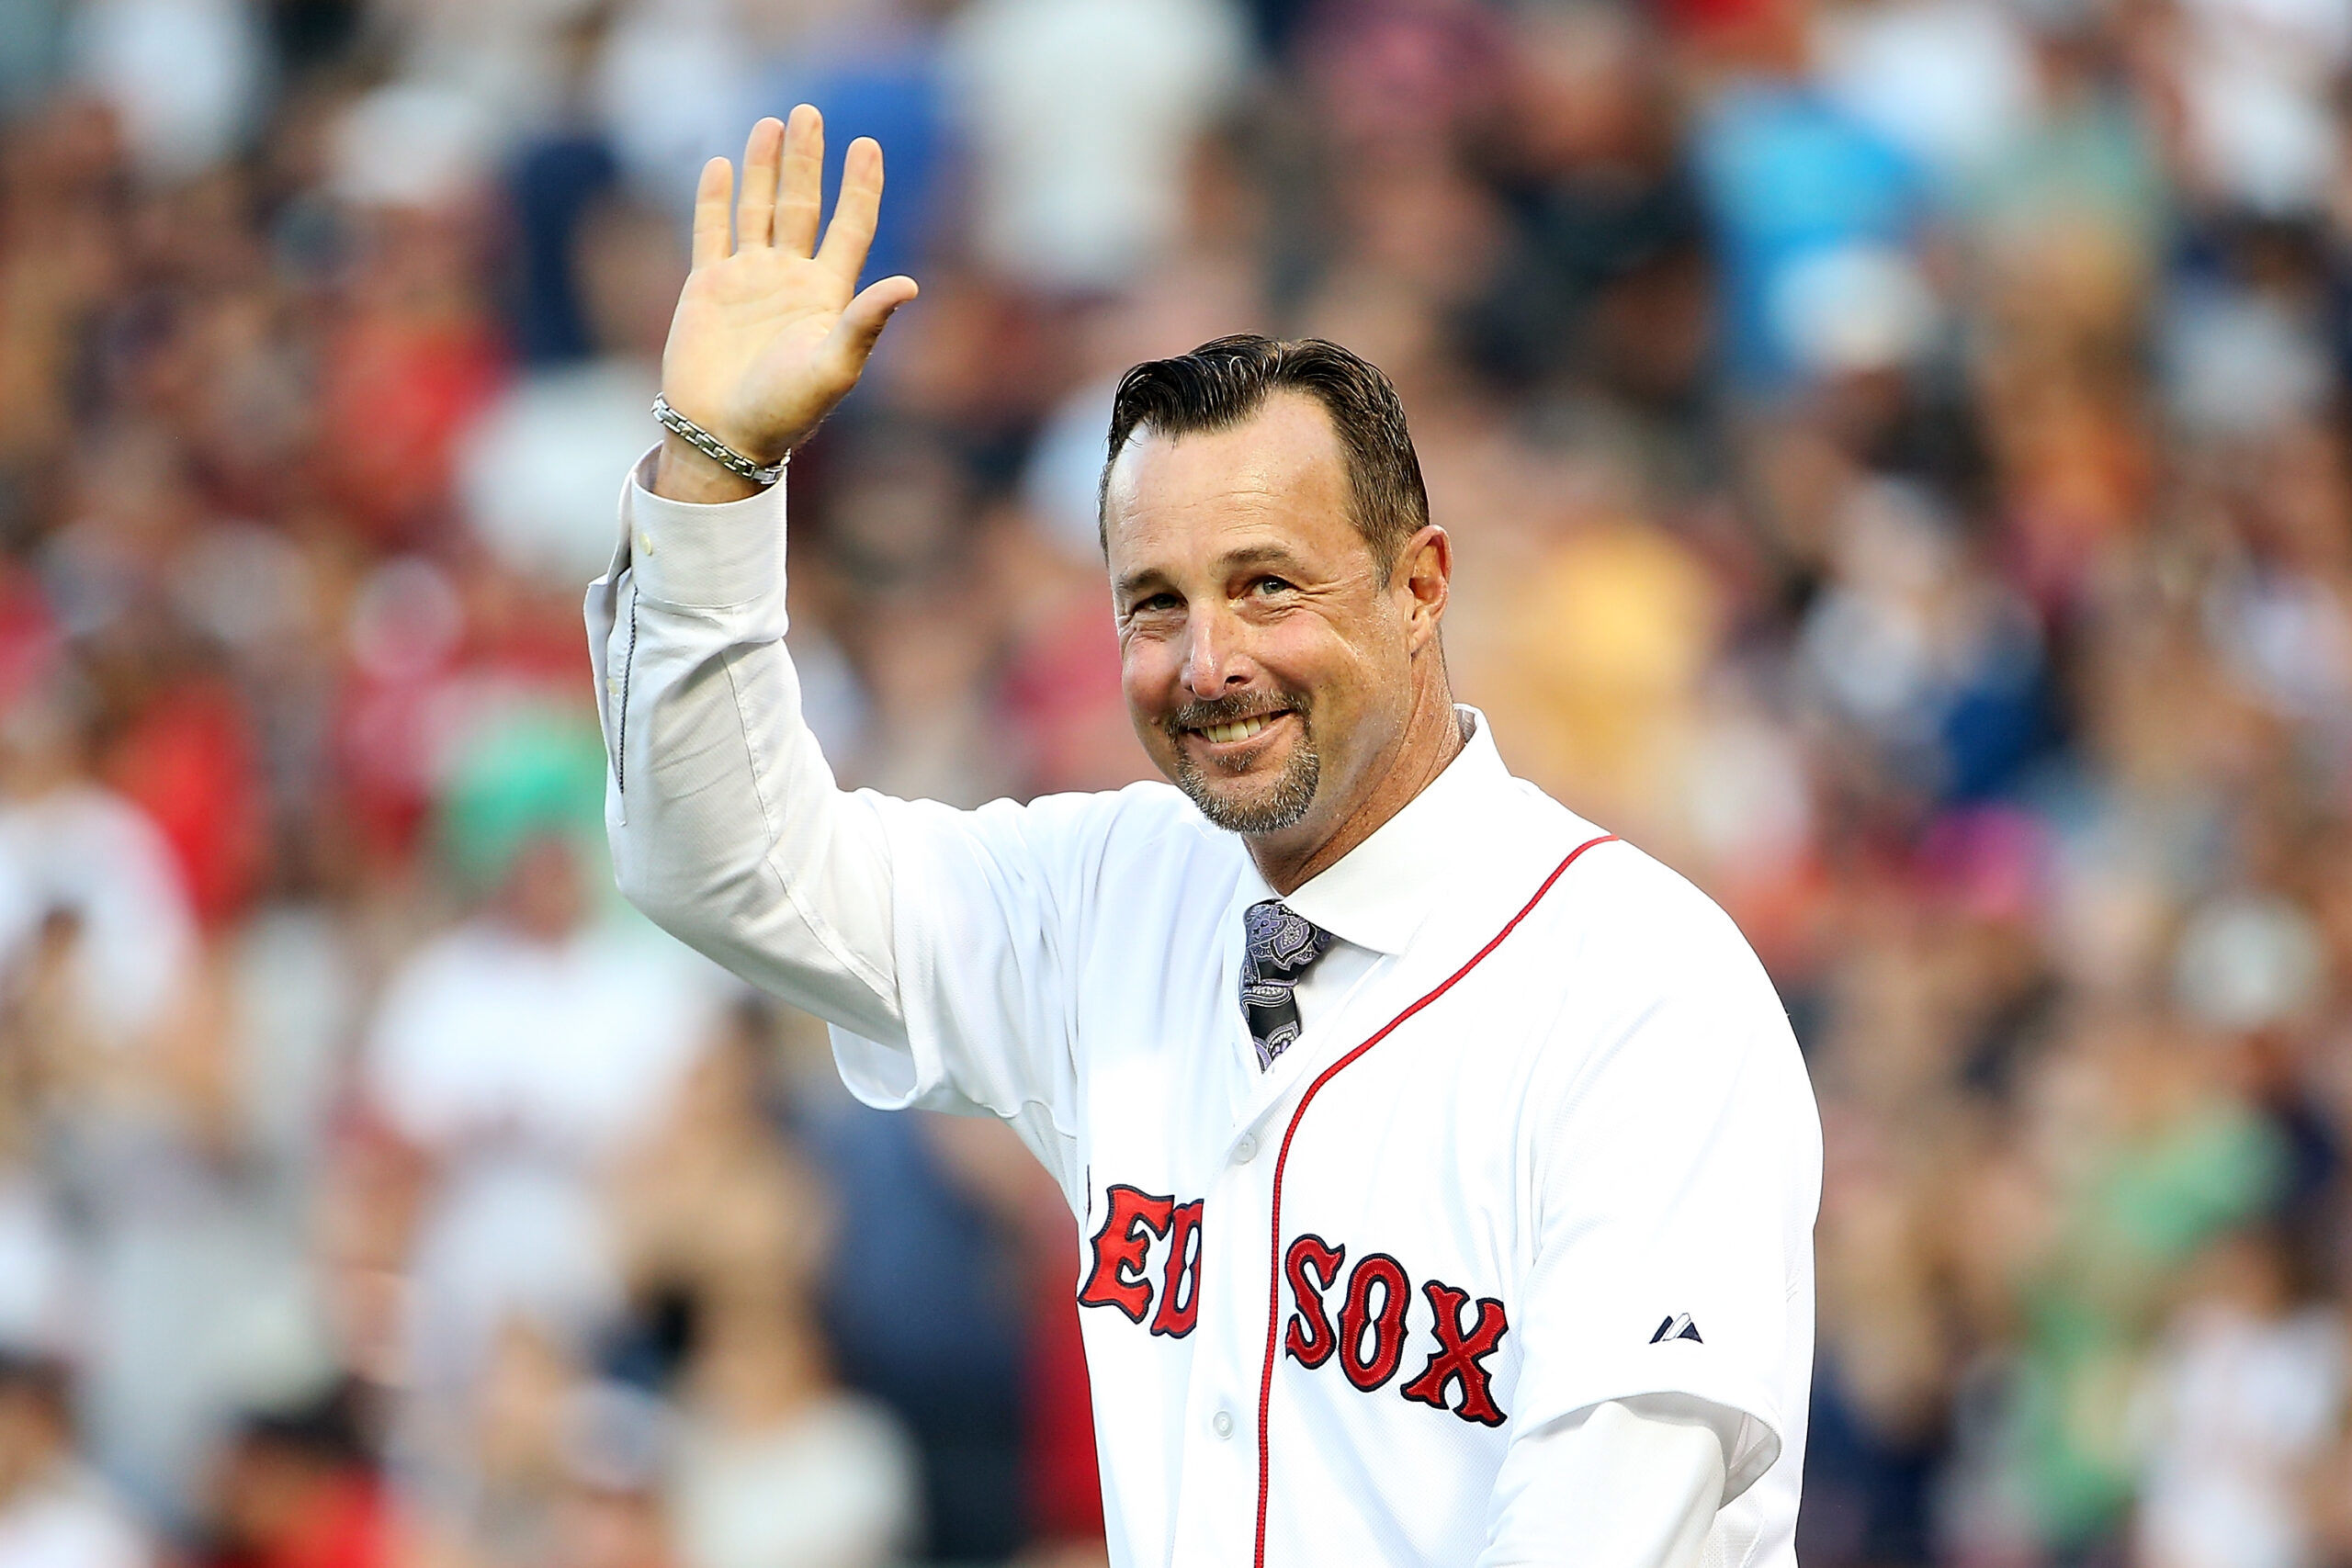 Varitek, Wakefield to be inducted into Red Sox Hall of Fame